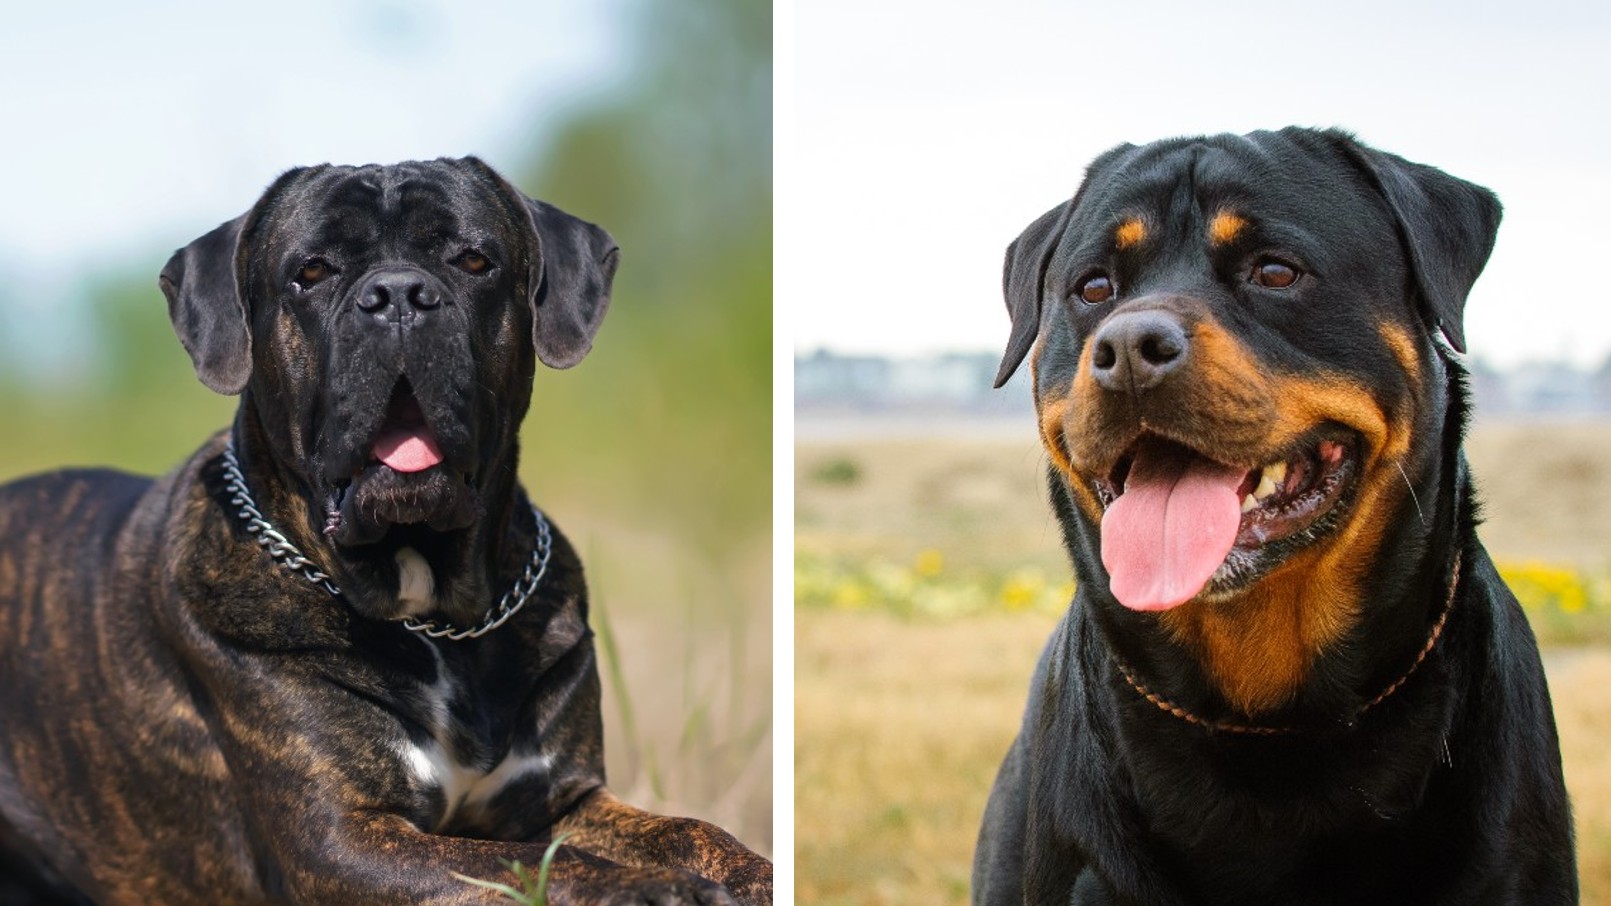 Cane Corso vs Rottweiler: Which breed is right for you?